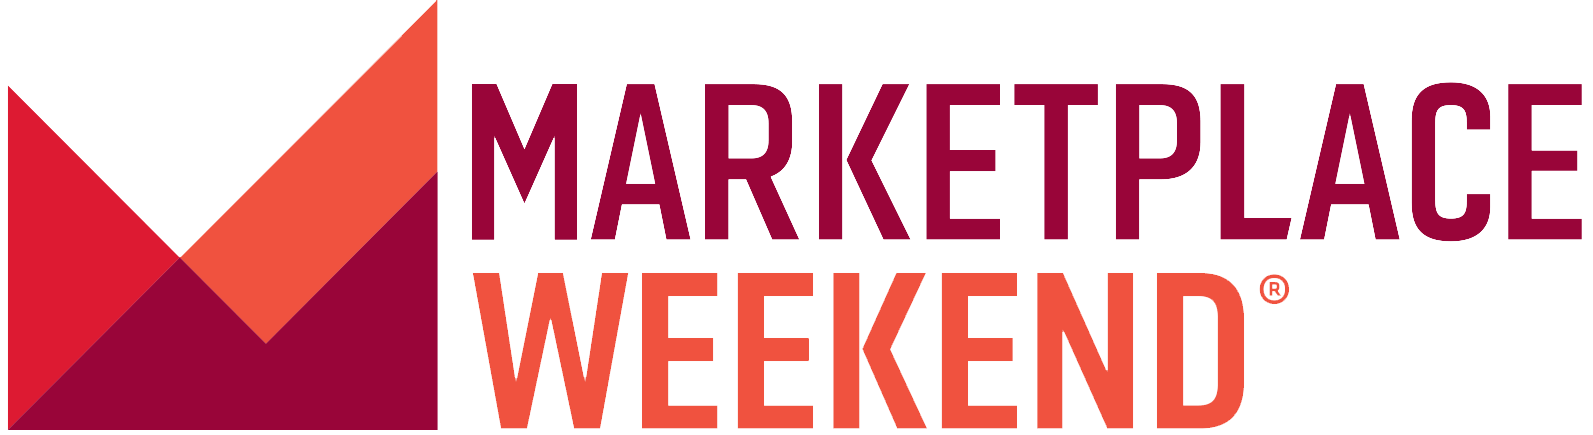 Marketplace Weekend for Friday, Feb. 13, 2015